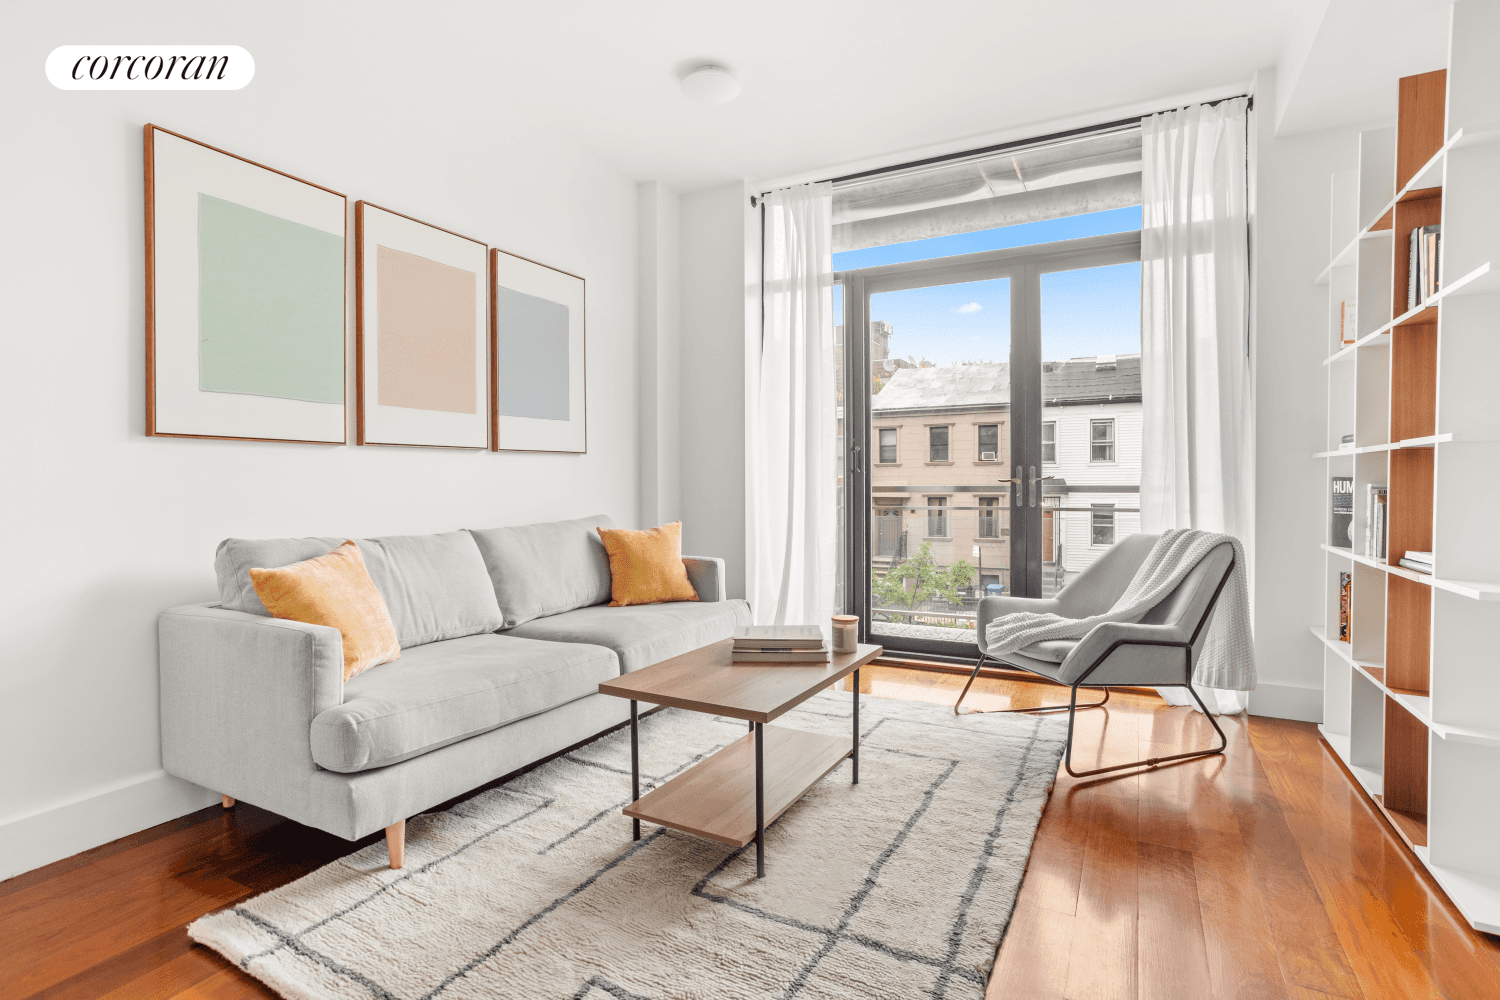 Welcome to residence 2C in the Verdi Condominium, a sunlit oasis in the heart of vibrant Fort Greene.